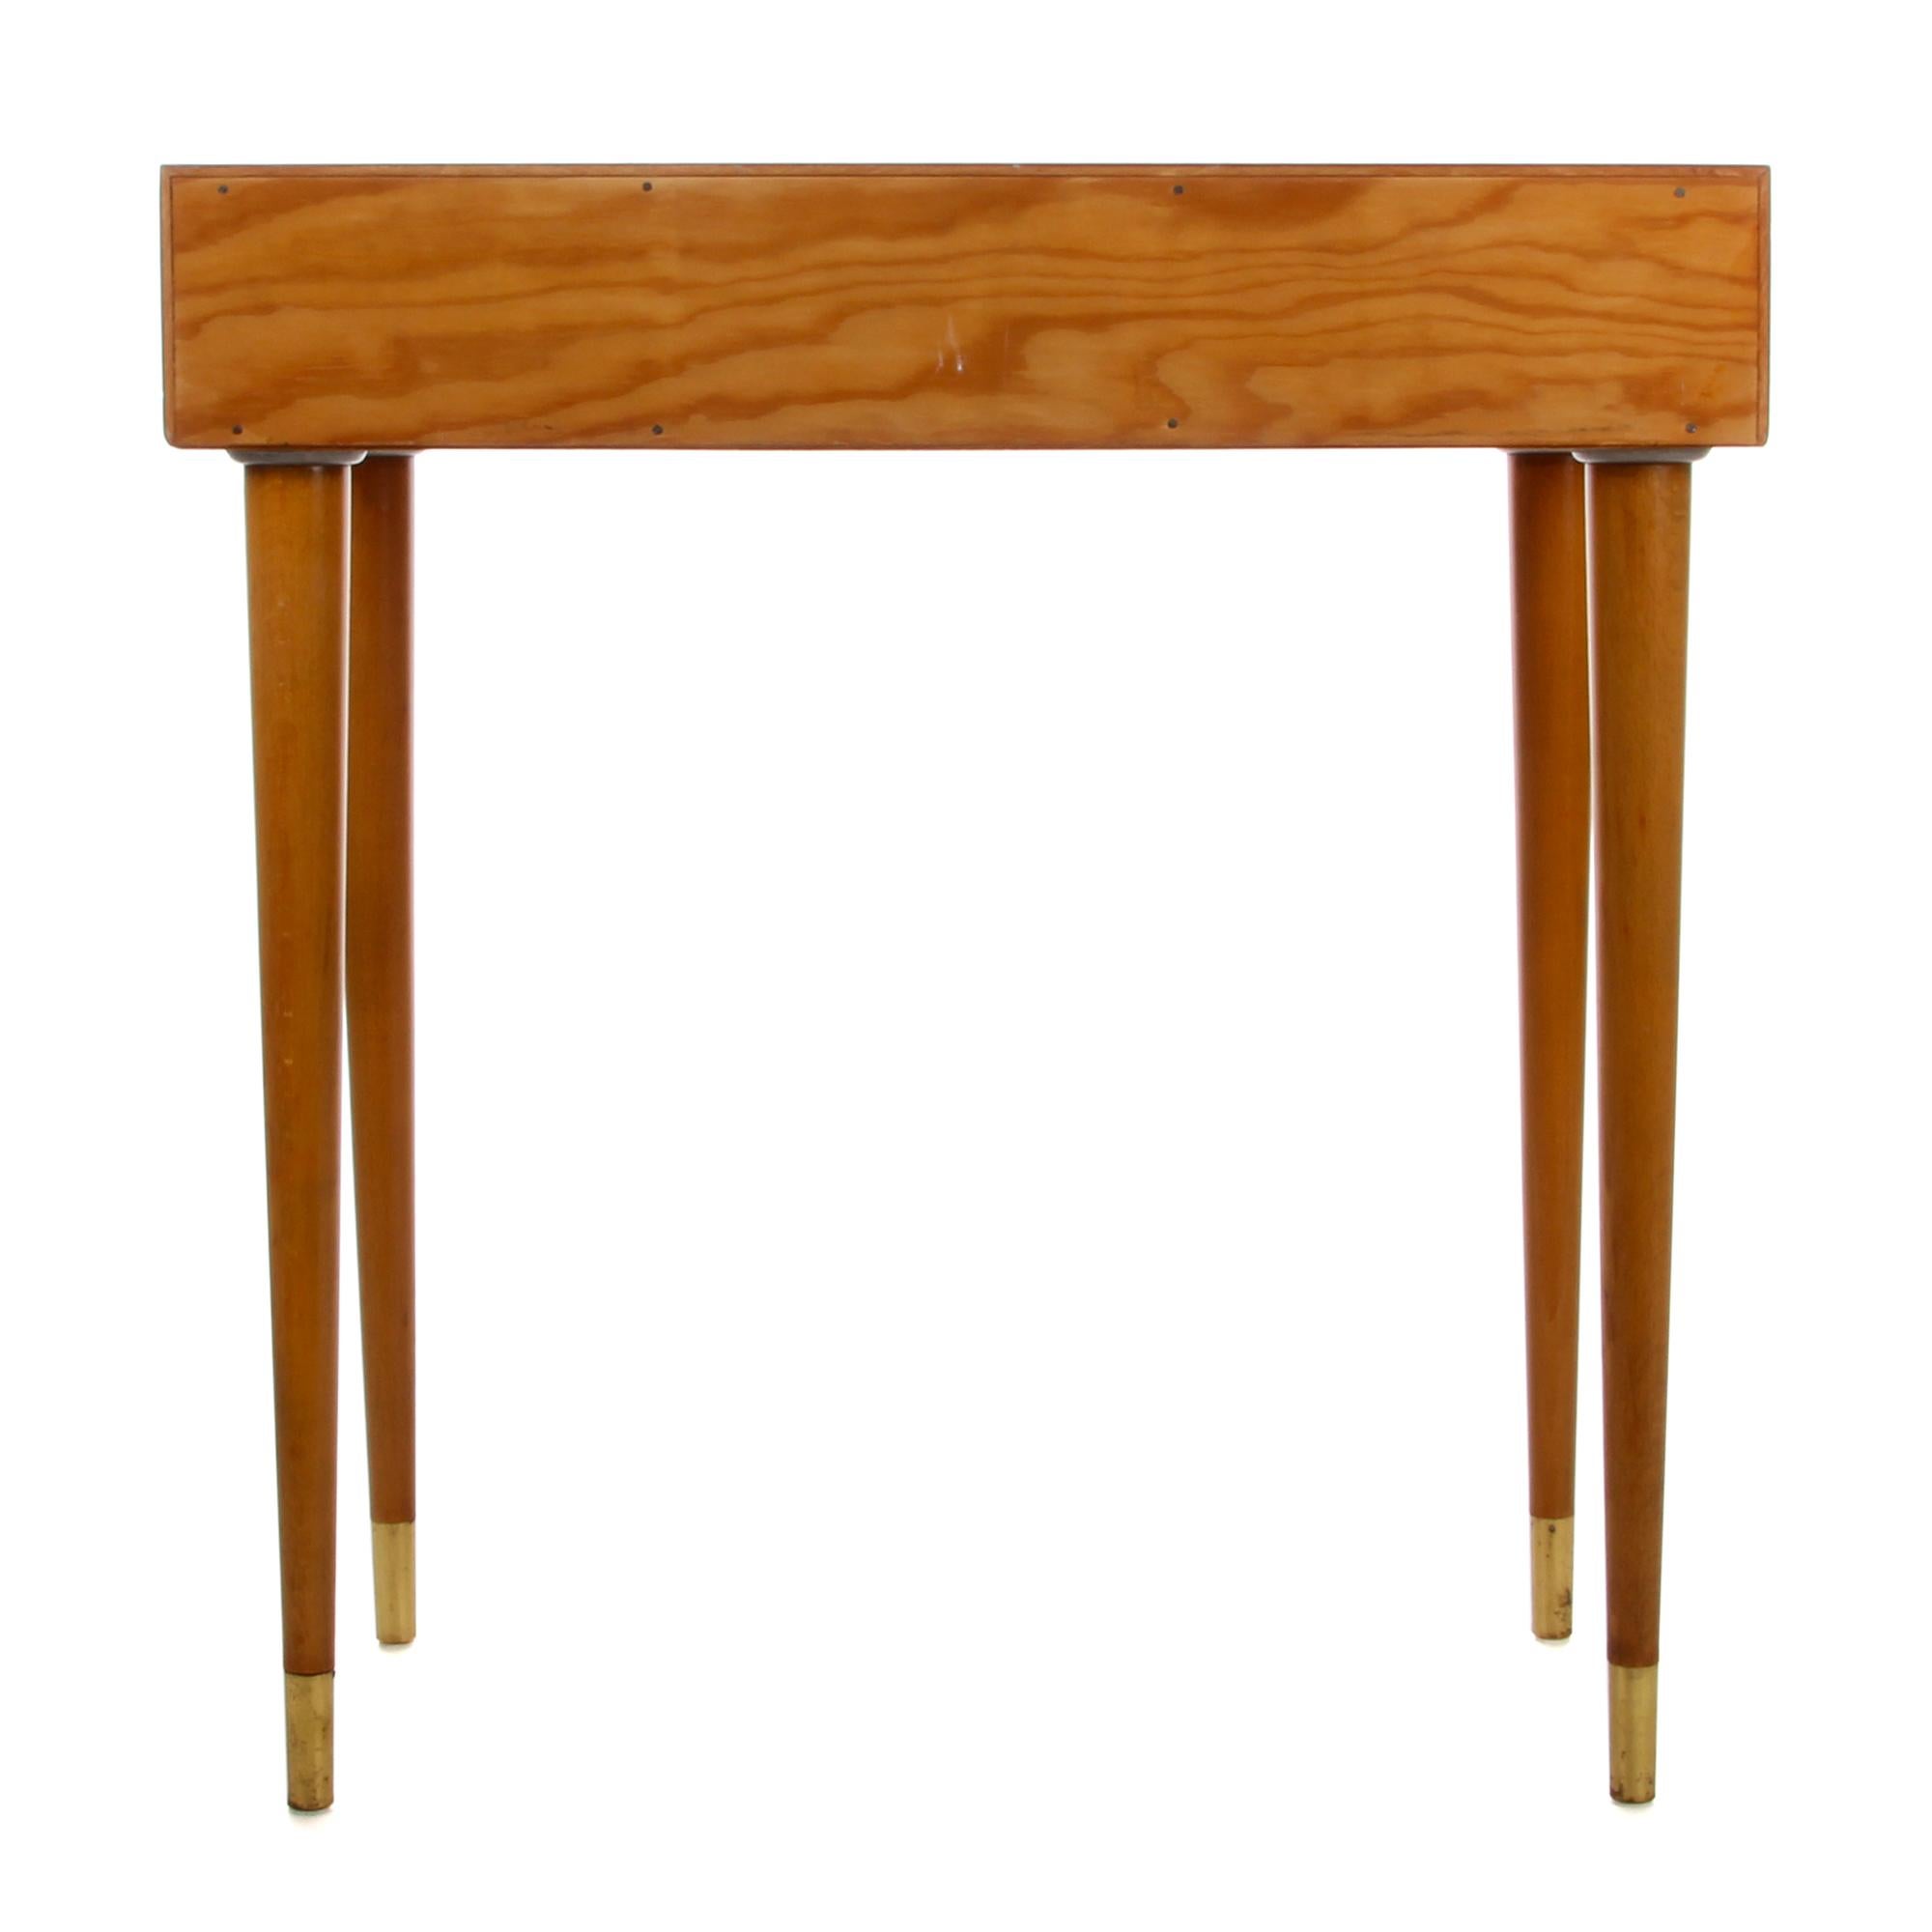 Brass Teak Entry Table, 1960s Danish Console Table or Side Table with Two Drawers